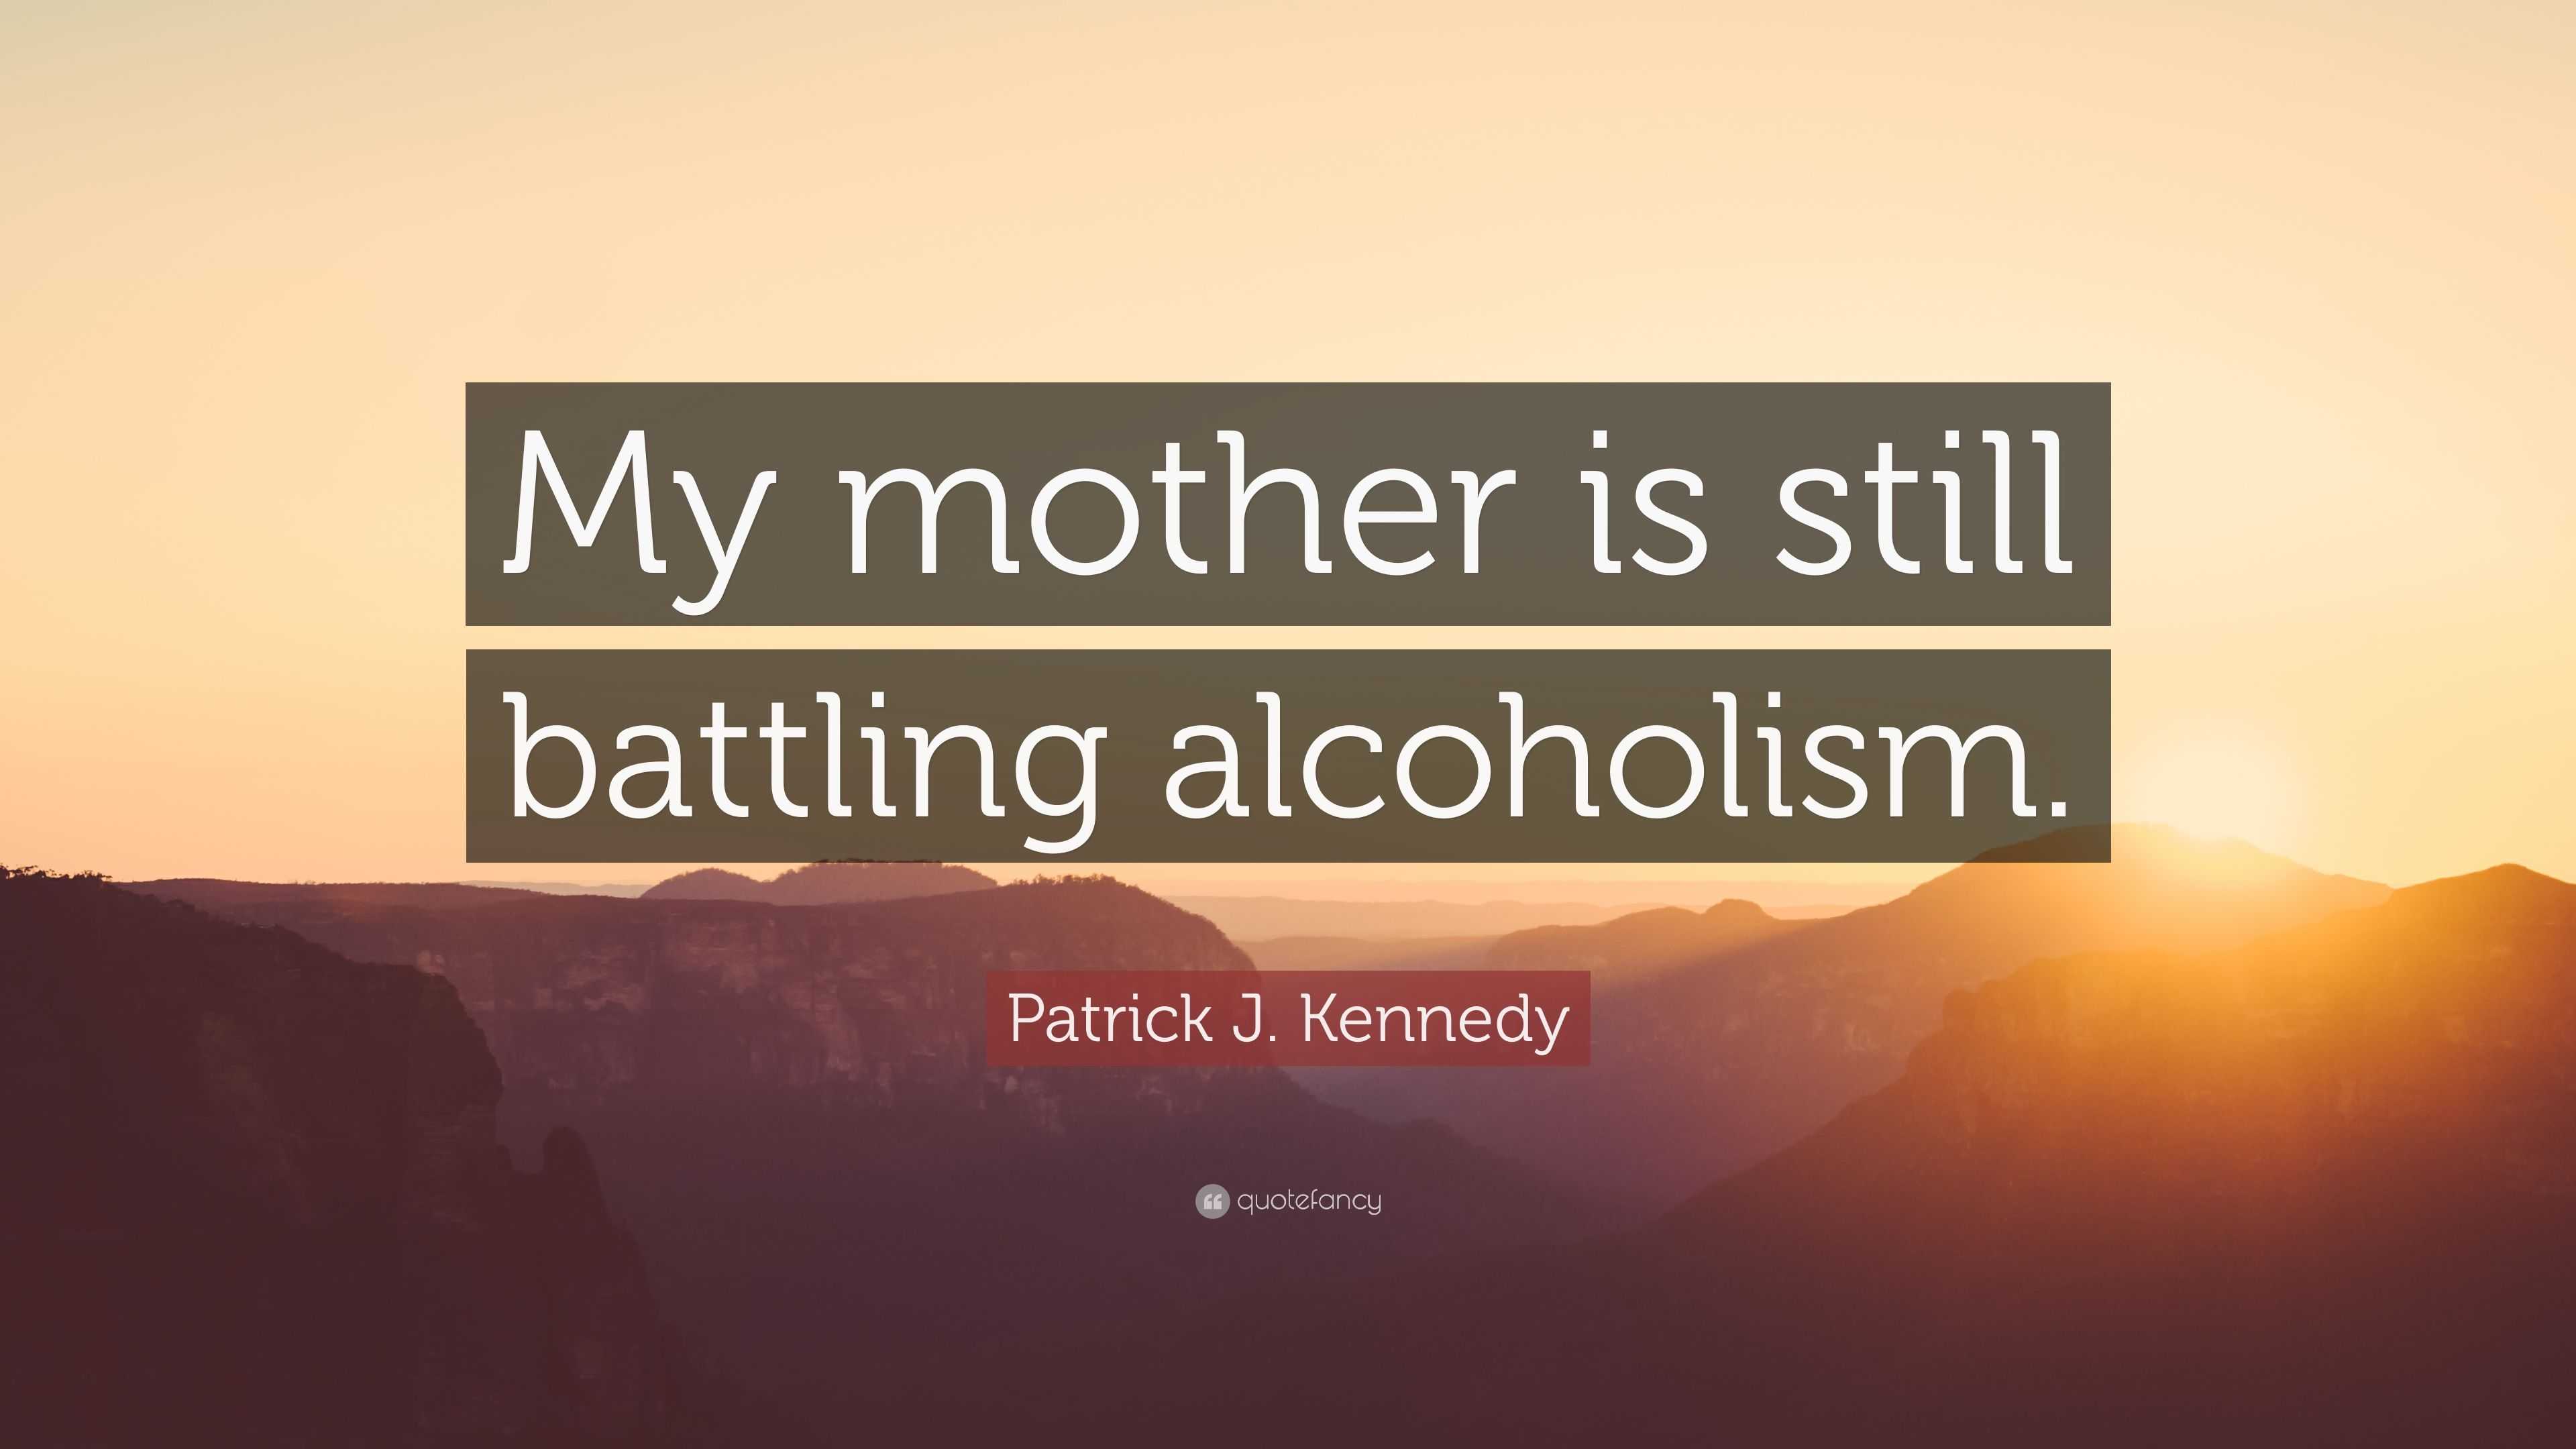 Patrick J Kennedy Quote My Mother Is Still Battling Alcoholism 7 Wallpapers Quotefancy